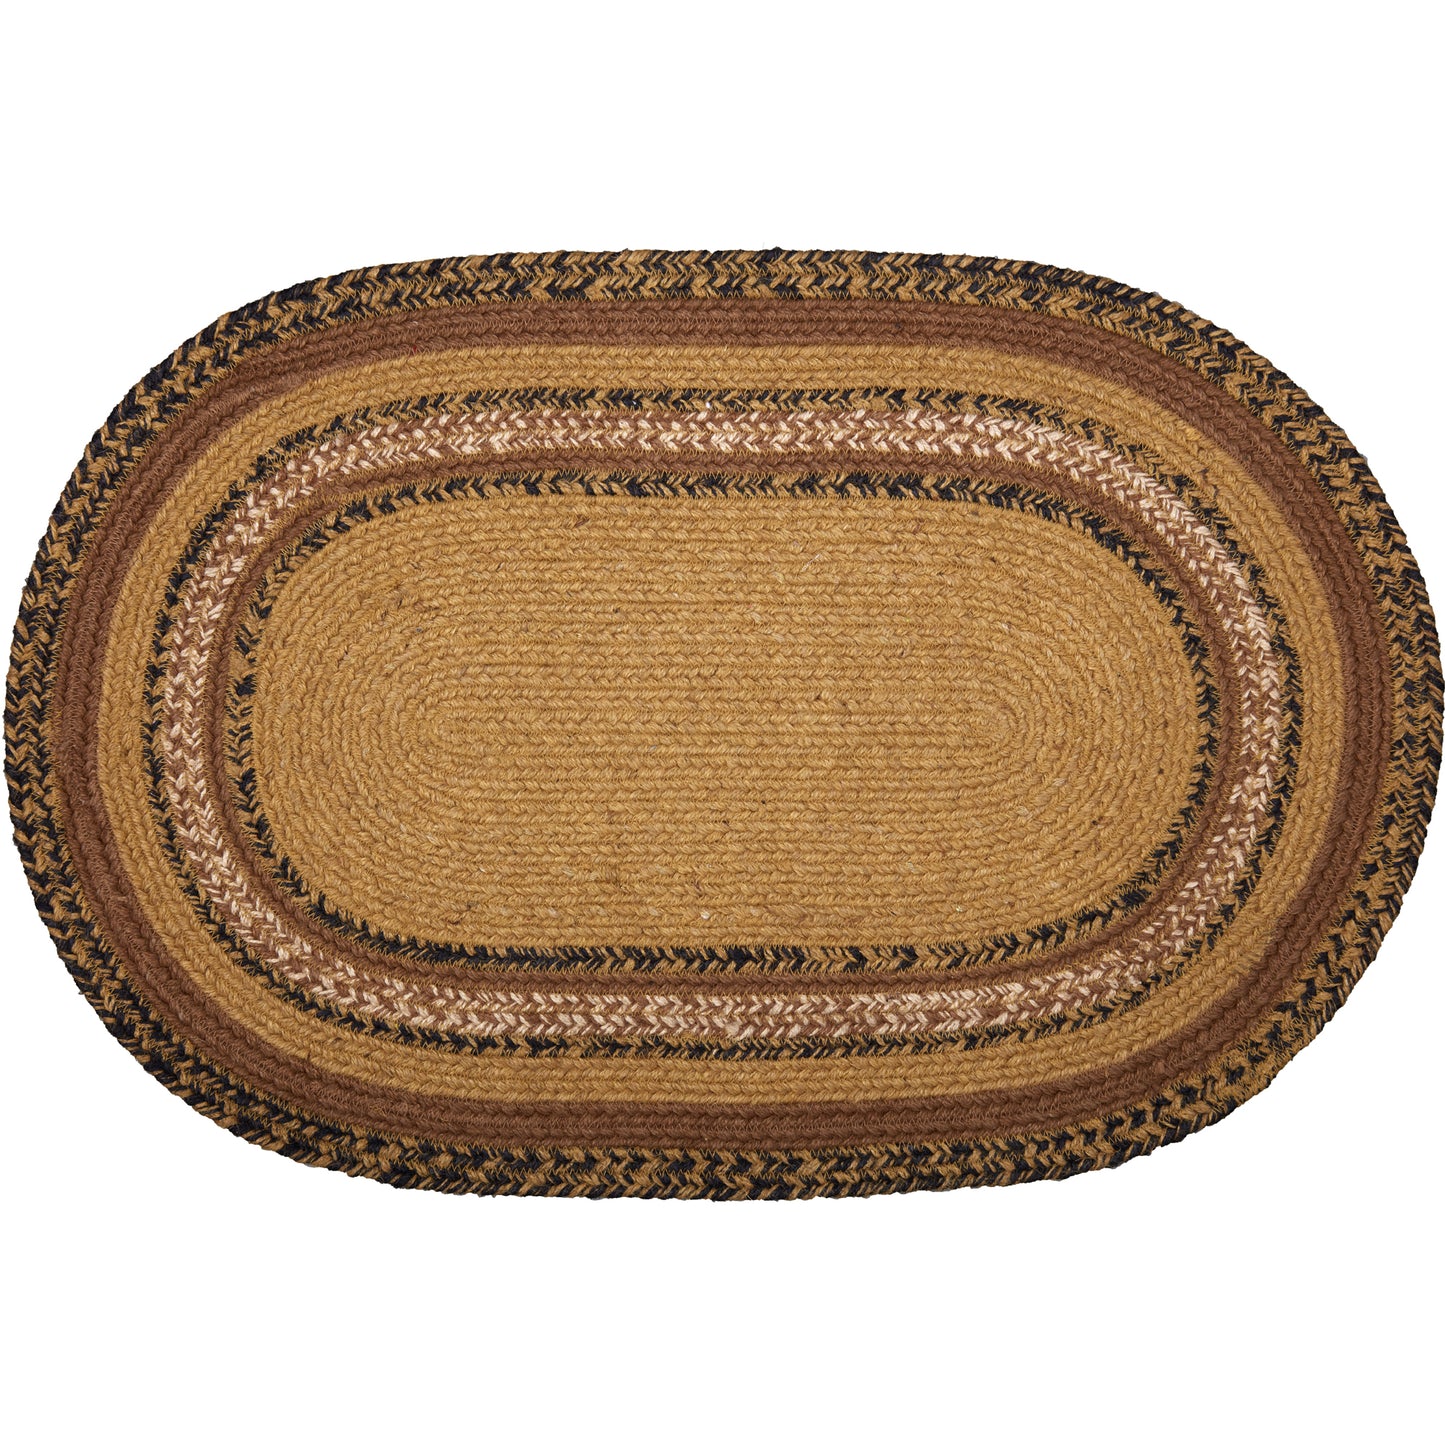 69792-Kettle-Grove-Jute-Rug-Oval-Stencil-Welcome-w-Pad-20x30-image-2